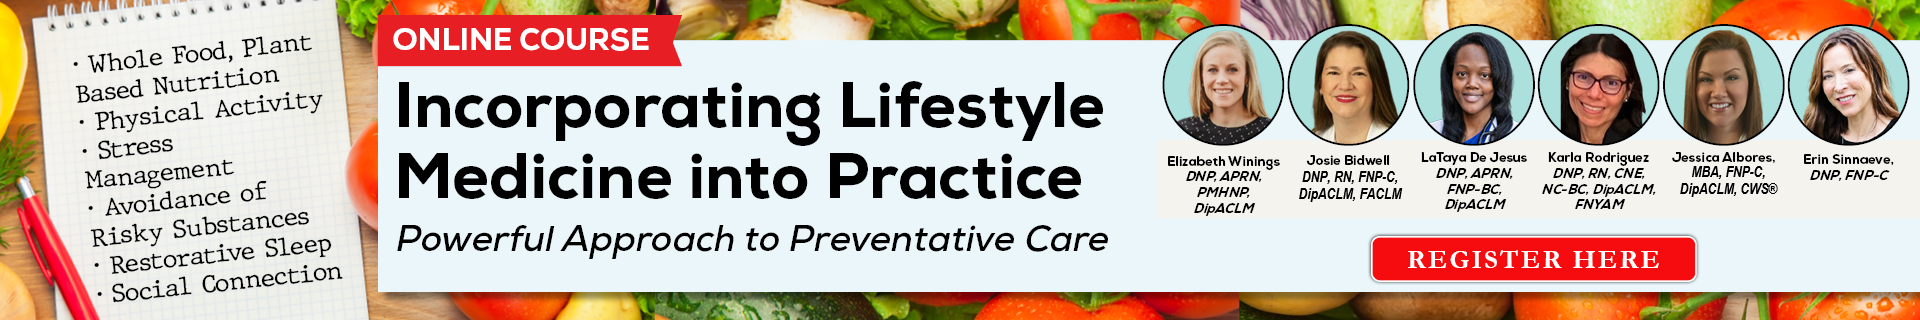 Incorporating Lifestyle Medicine into Practice: Powerful Approach to Preventative Care